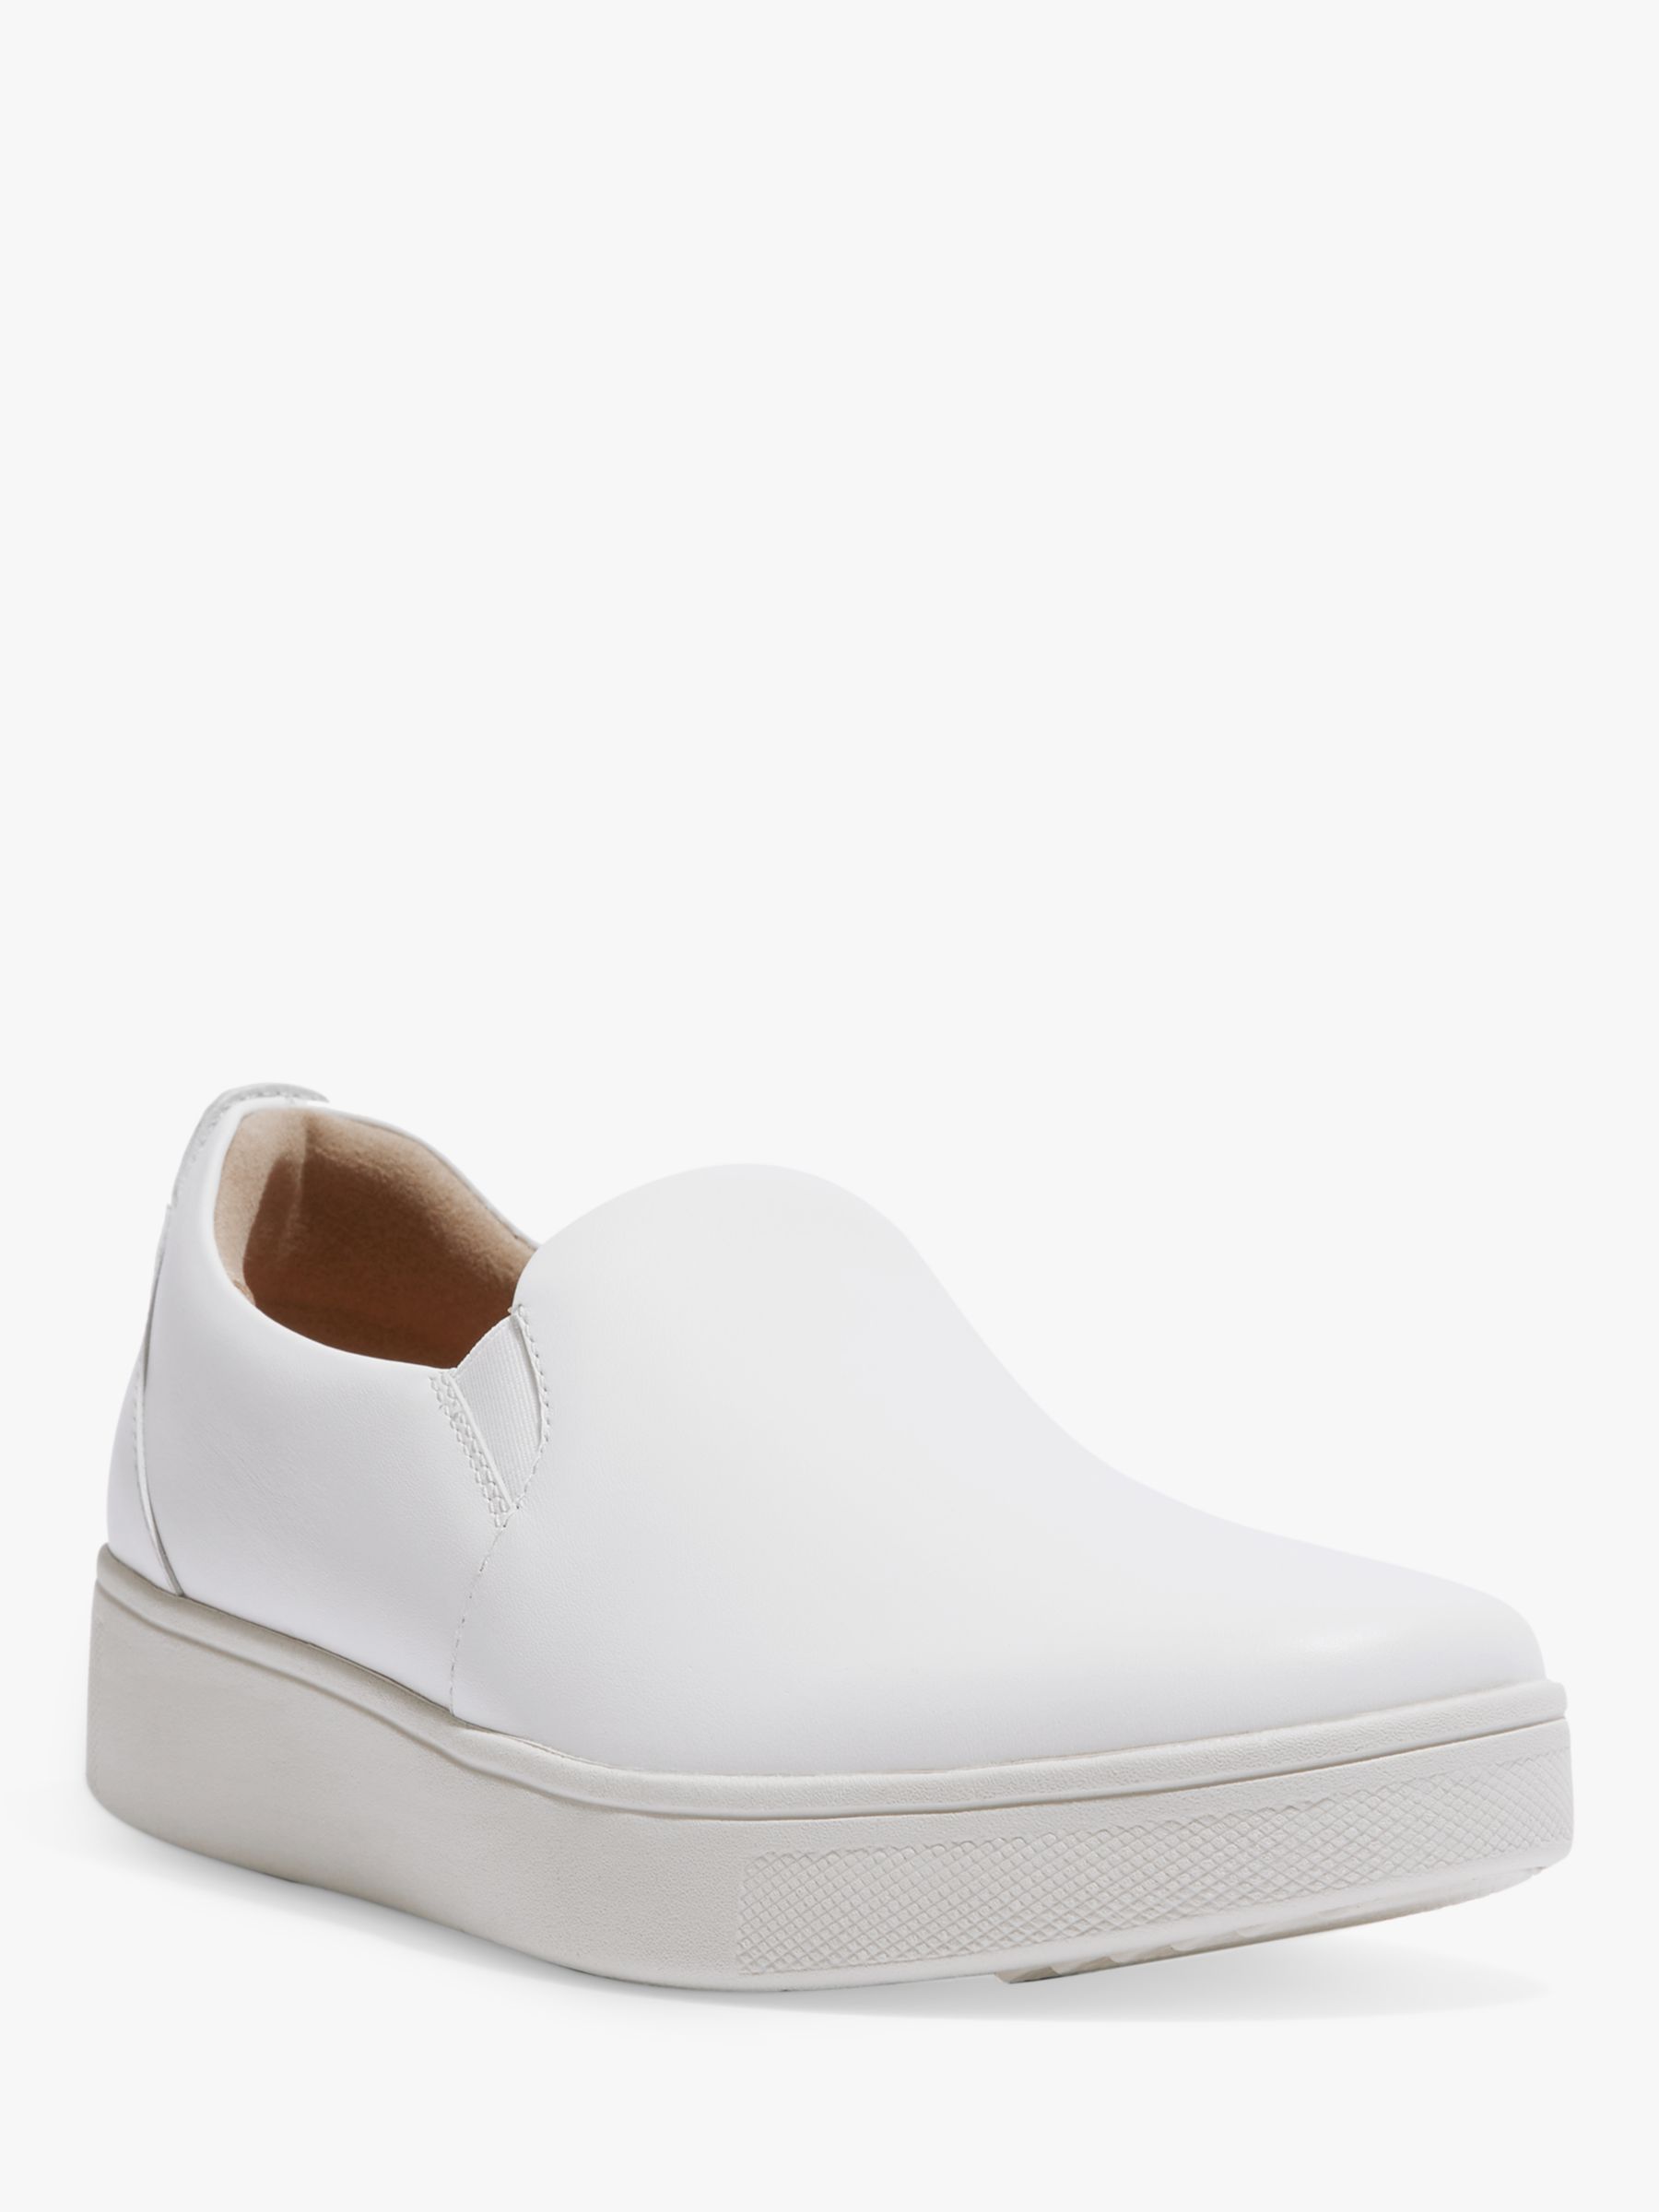 Buy FitFlop Rally Leather Slip On Skate Trainers Online at johnlewis.com